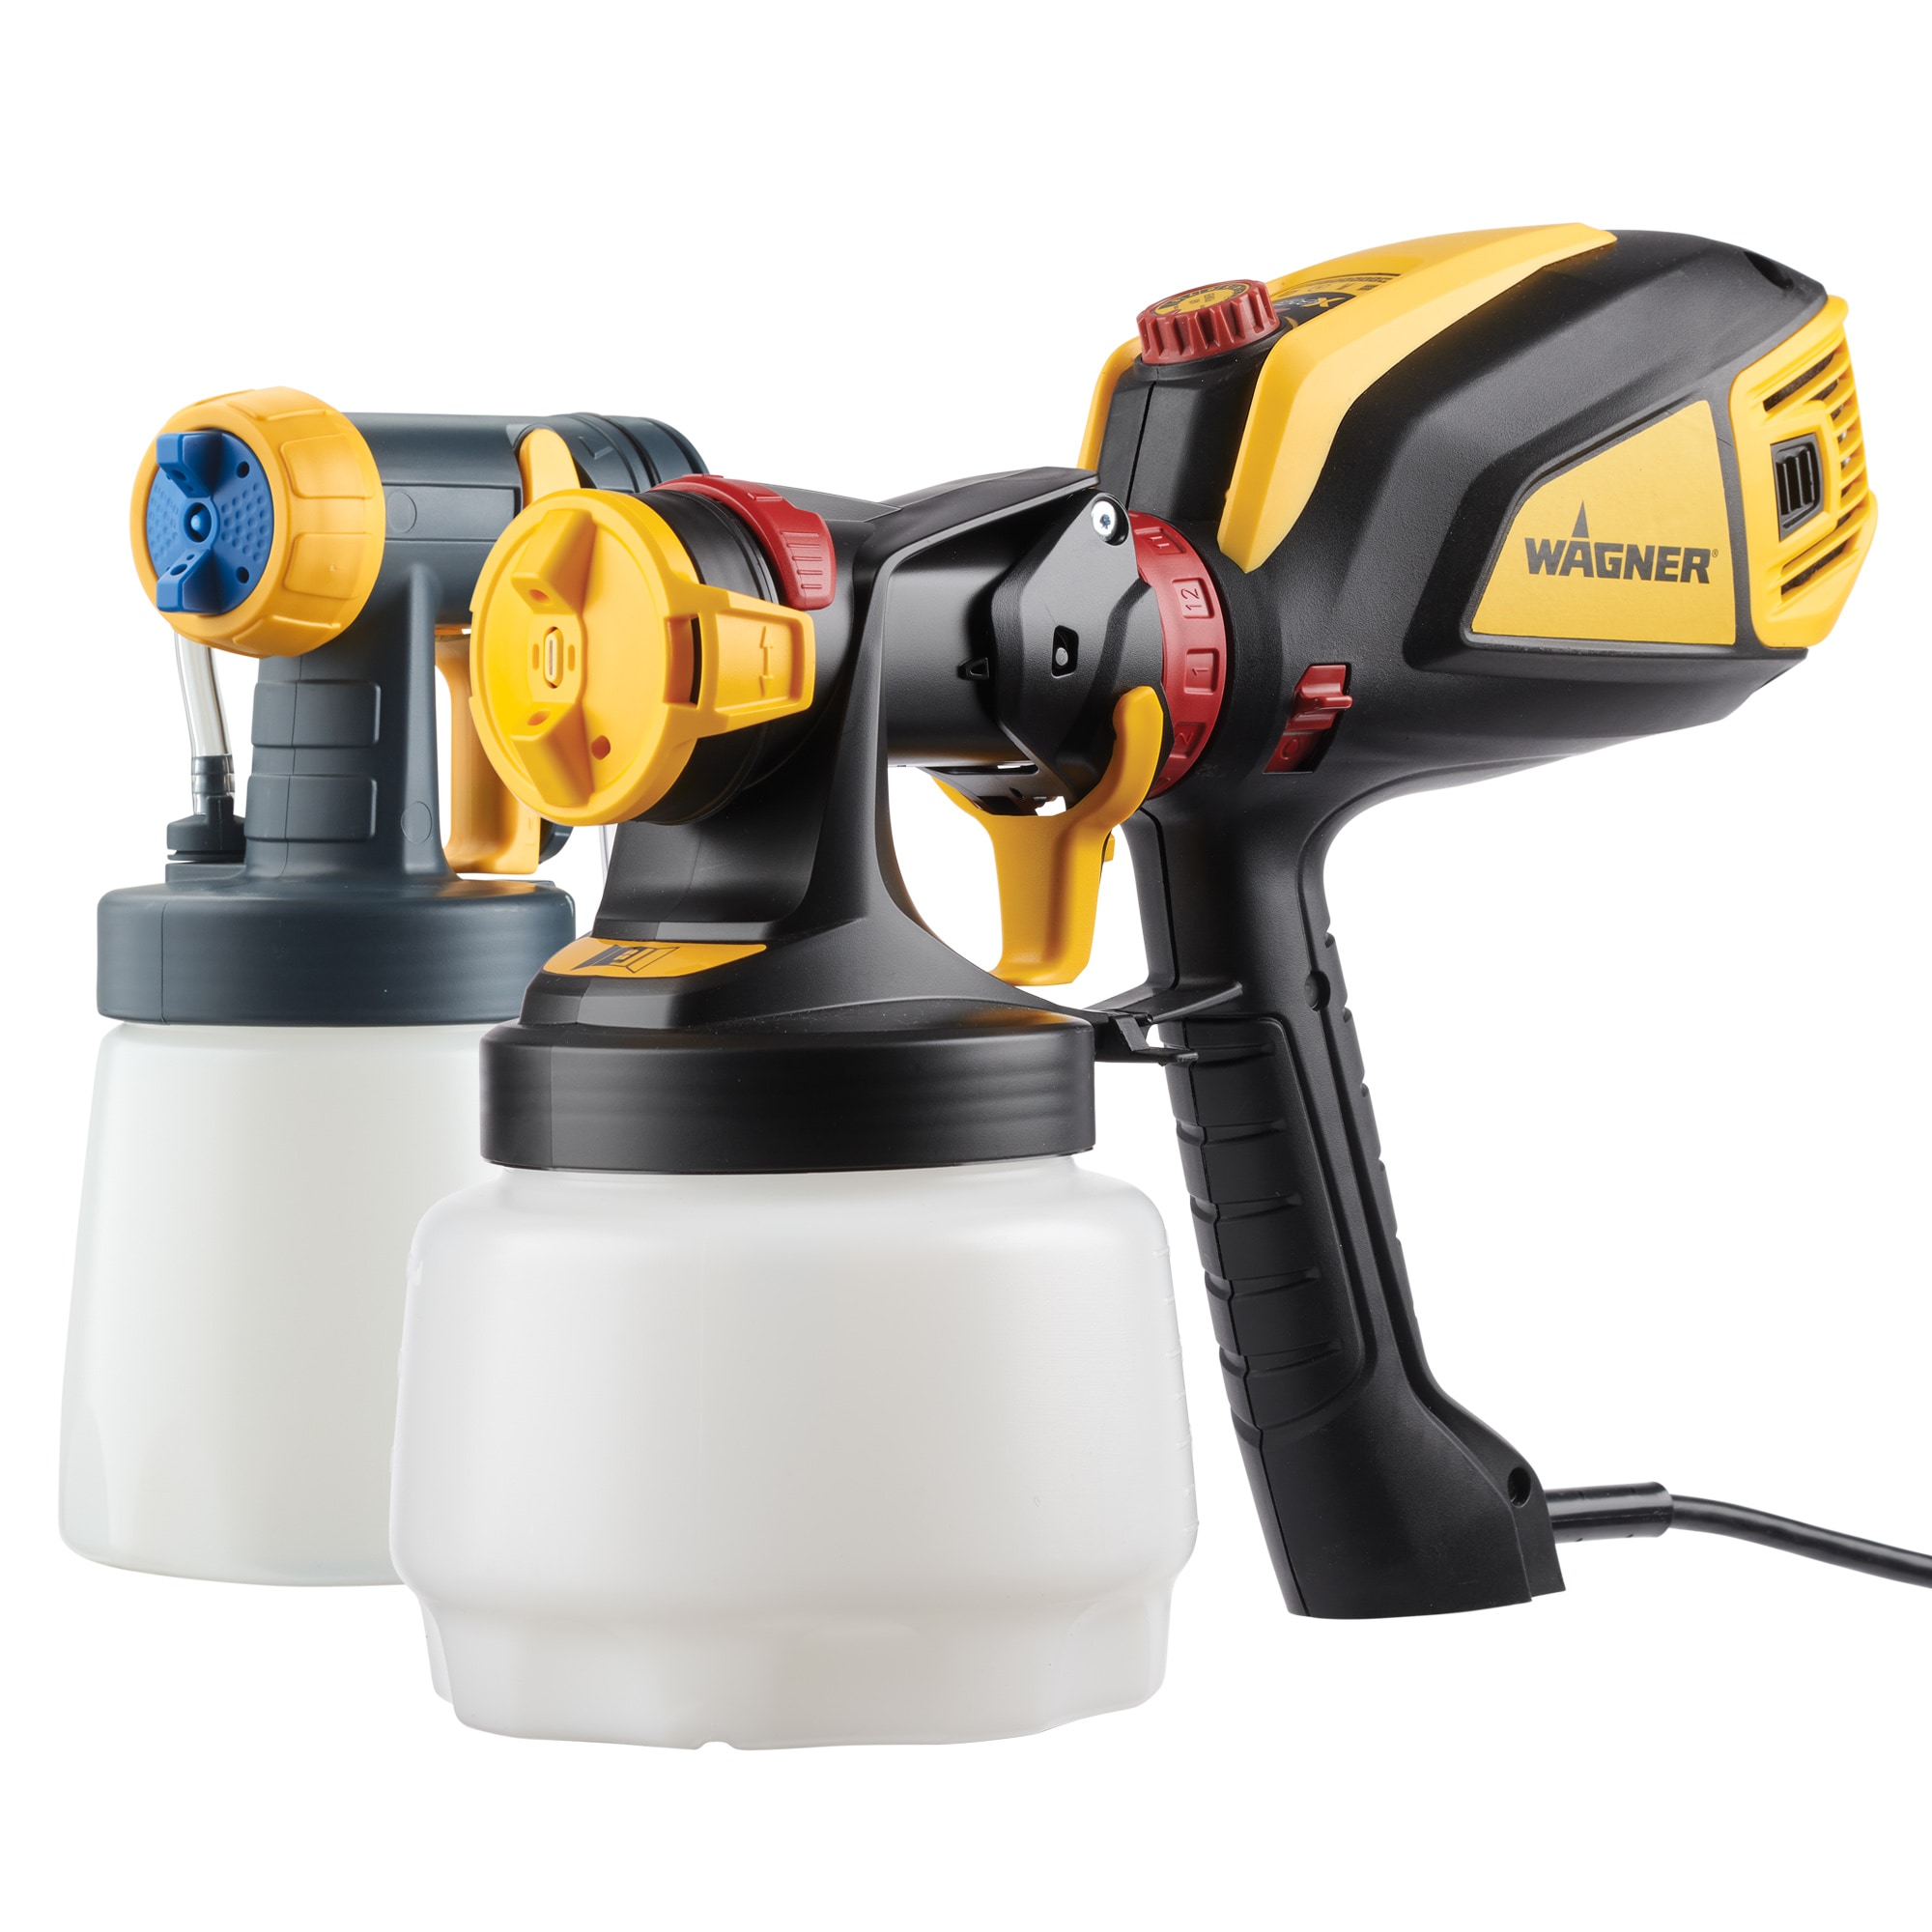 Paint Sprayer, Handheld HVLP Air Spray Paint Gun, Includes 2 Nozzles, 3  Adjustments & a Regulator, Cup Filter, Brush & Wrench, House Interior Fence  Paint Auto Sprayer for Walls & Furniture- By